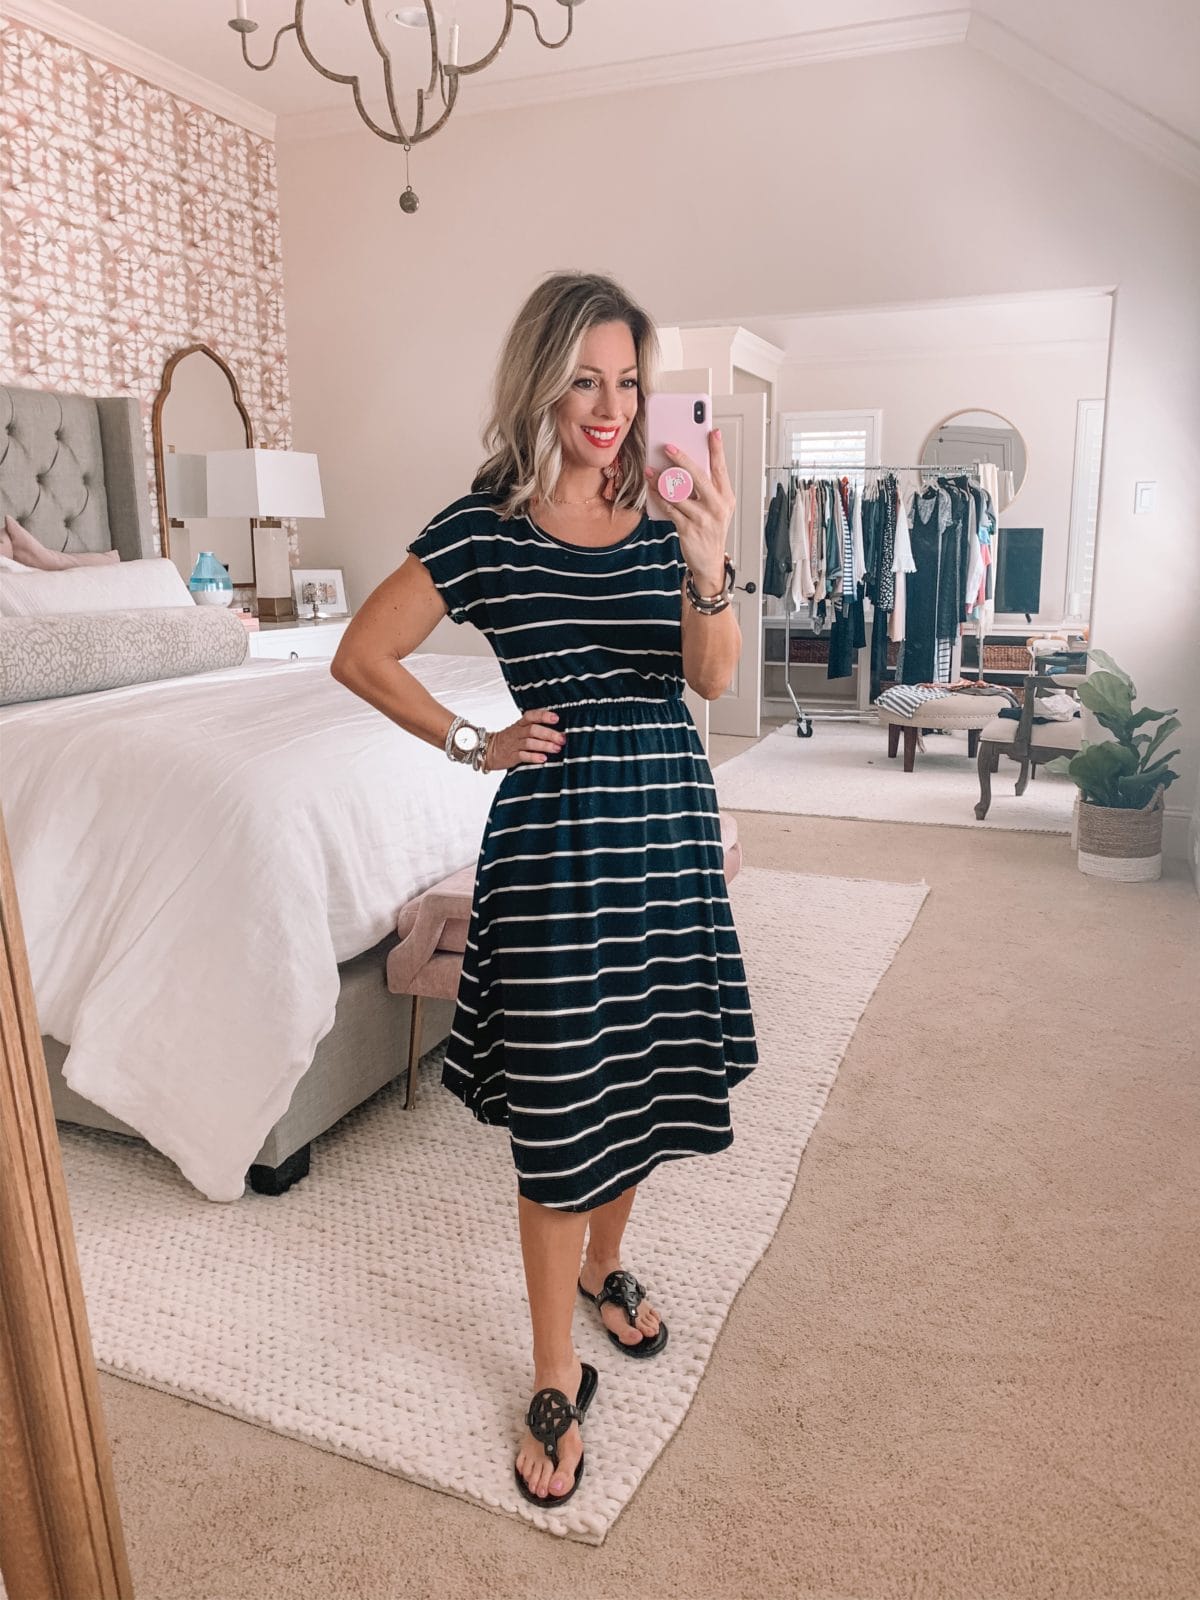 Black and white Stripe tee shirt Dress, Miller Dupe Sandals